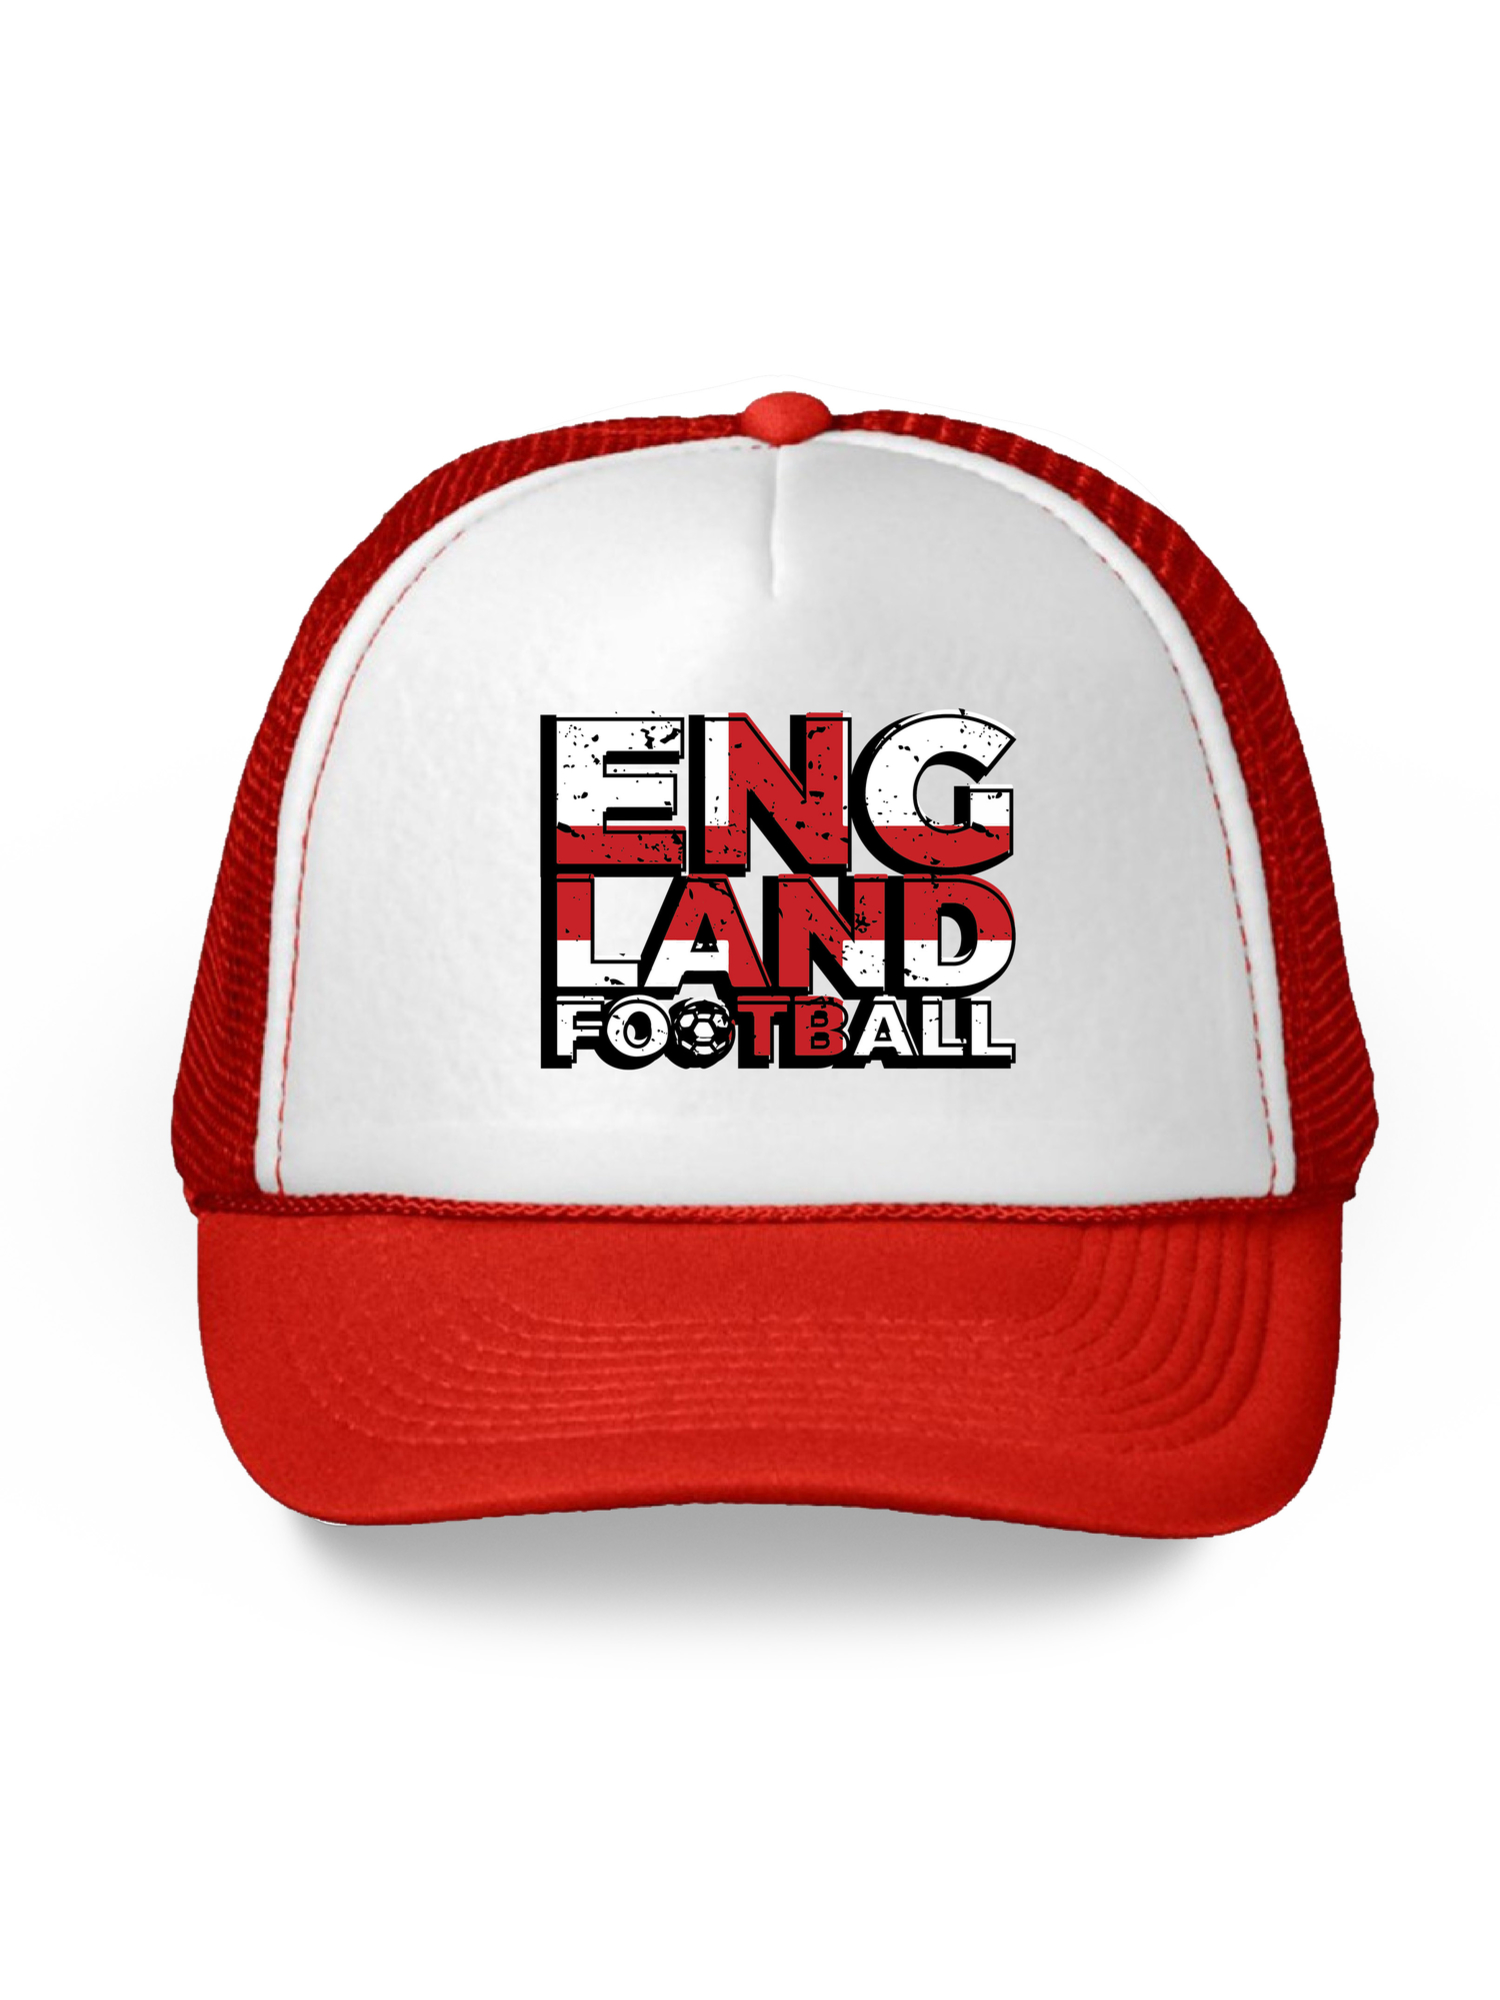 Awkward Styles England Football Hat England Trucker Hats for Men and Women Hat Gifts from England English Soccer Cap English Hats Unisex England Snapback Hat England 2018 Trucker Hats English Soccer - image 1 of 6